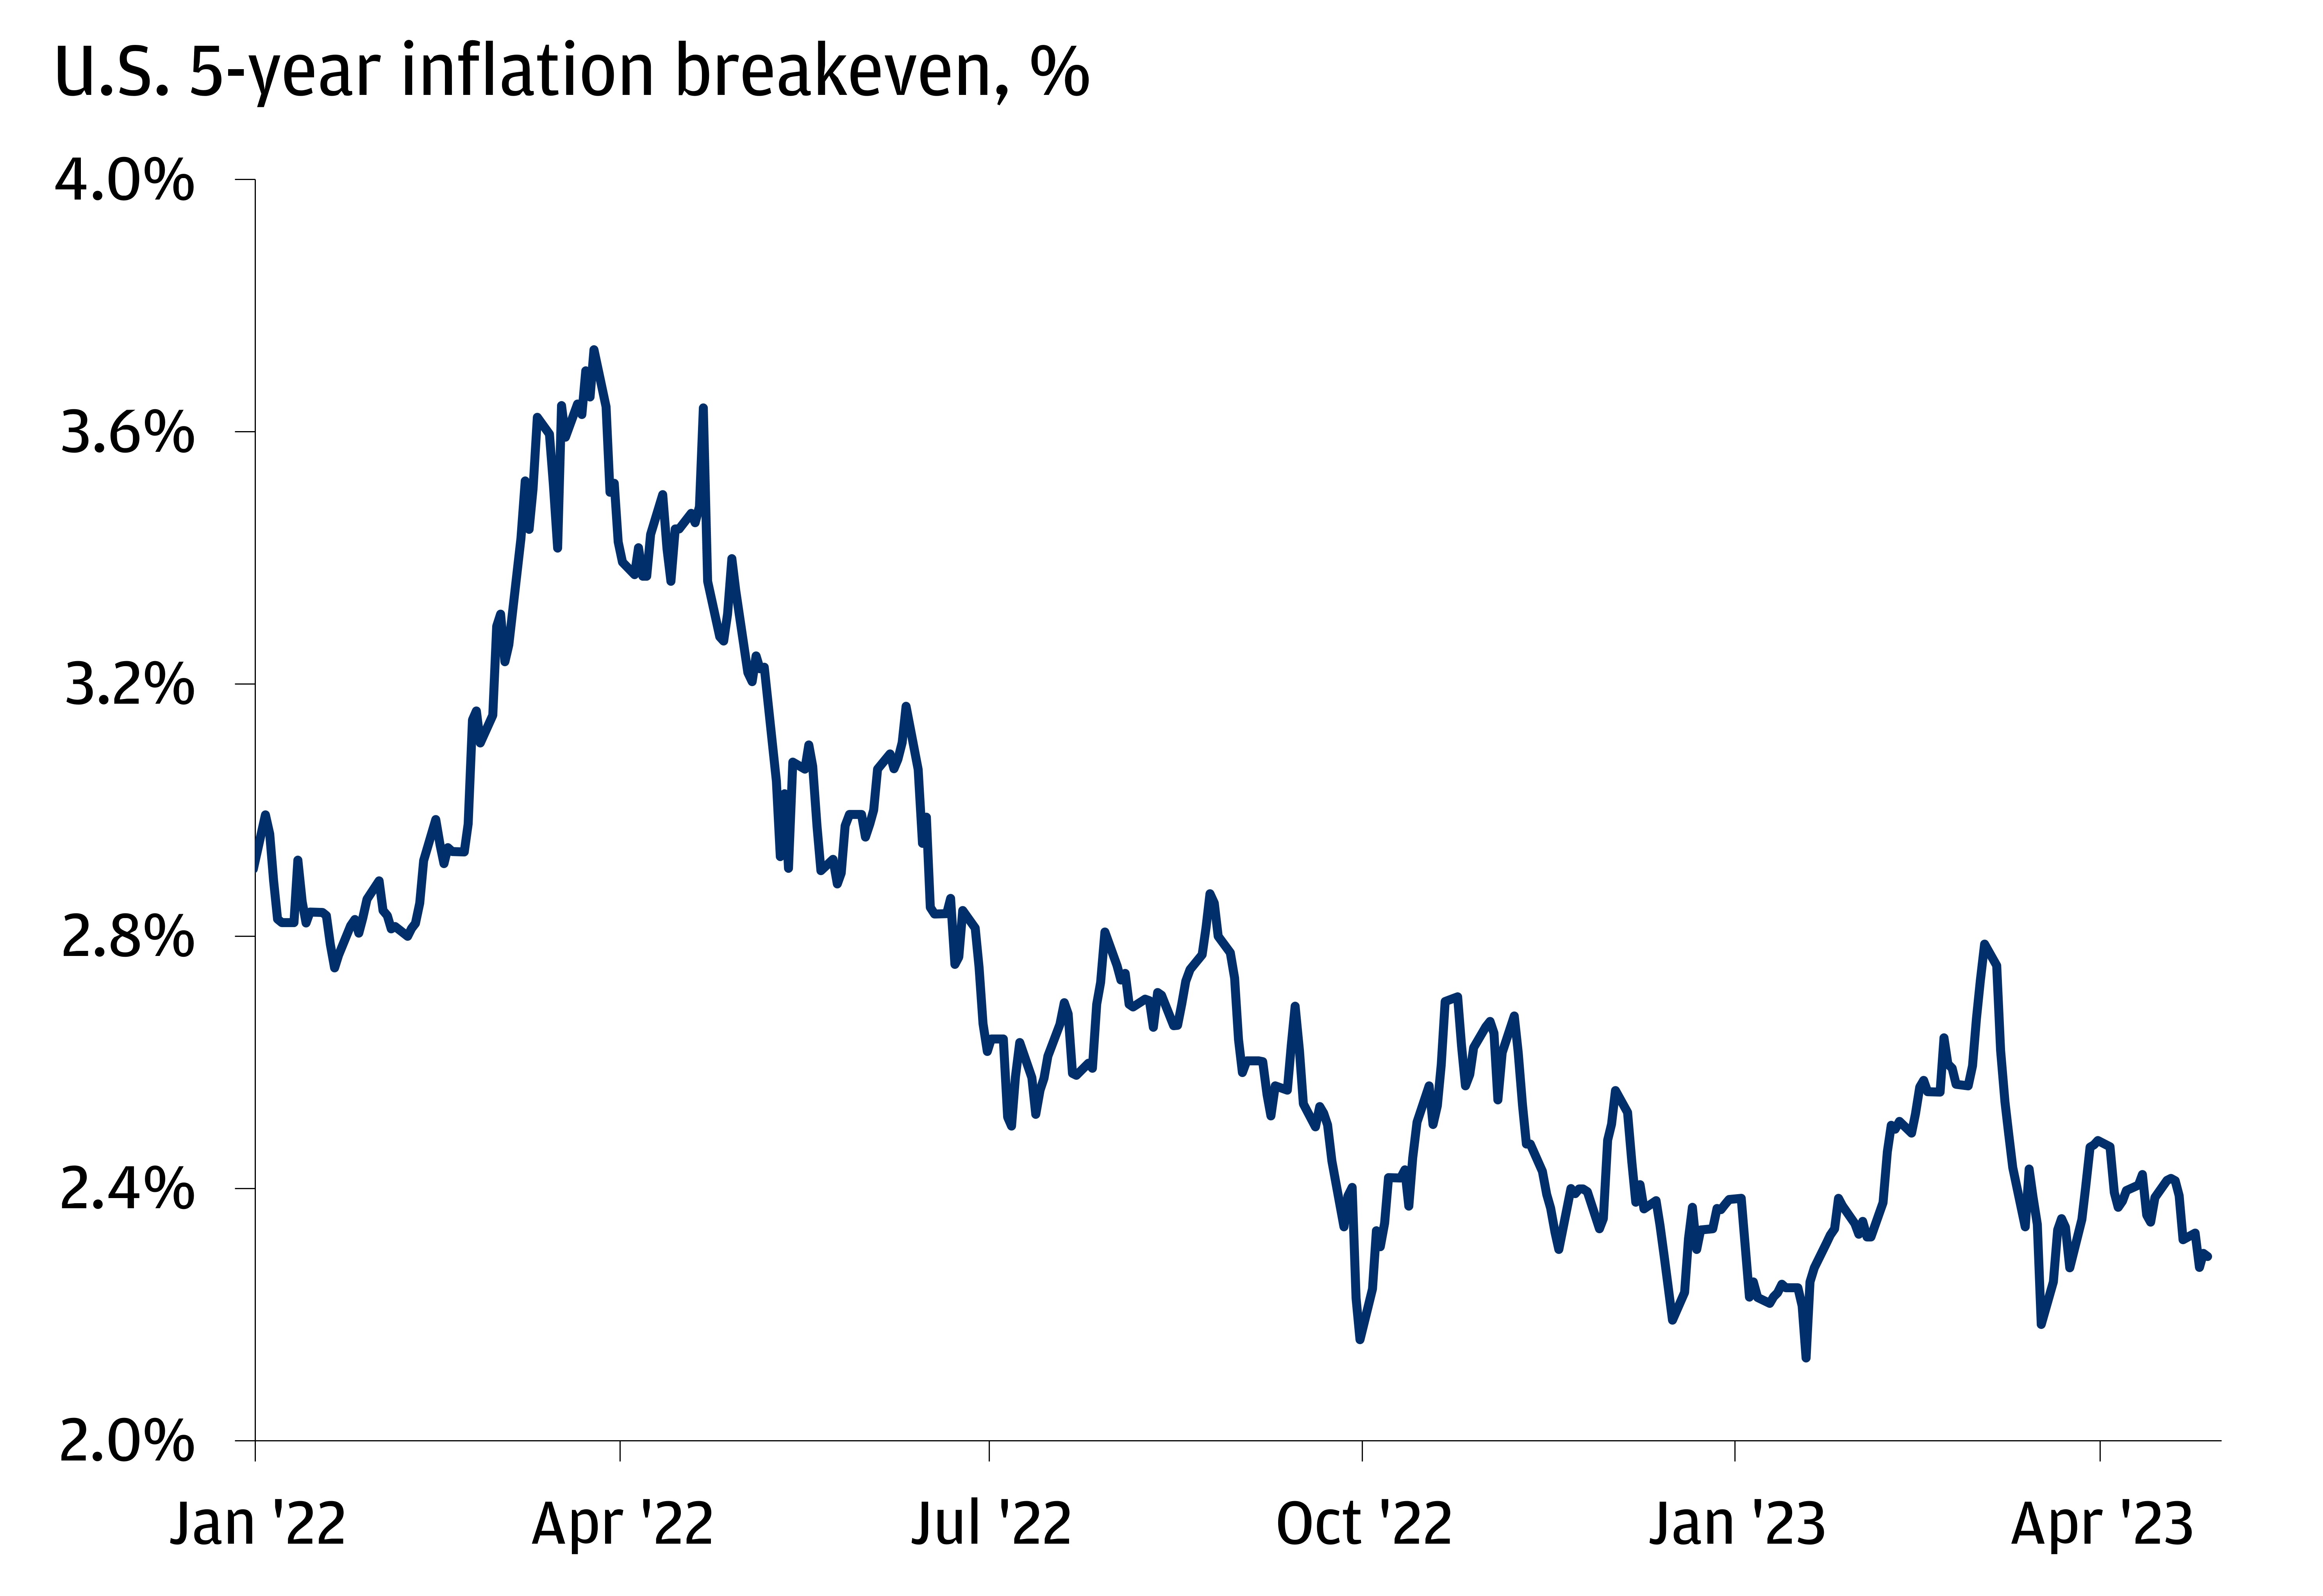 The chart describes 5-year inflation breakeven in percentages.